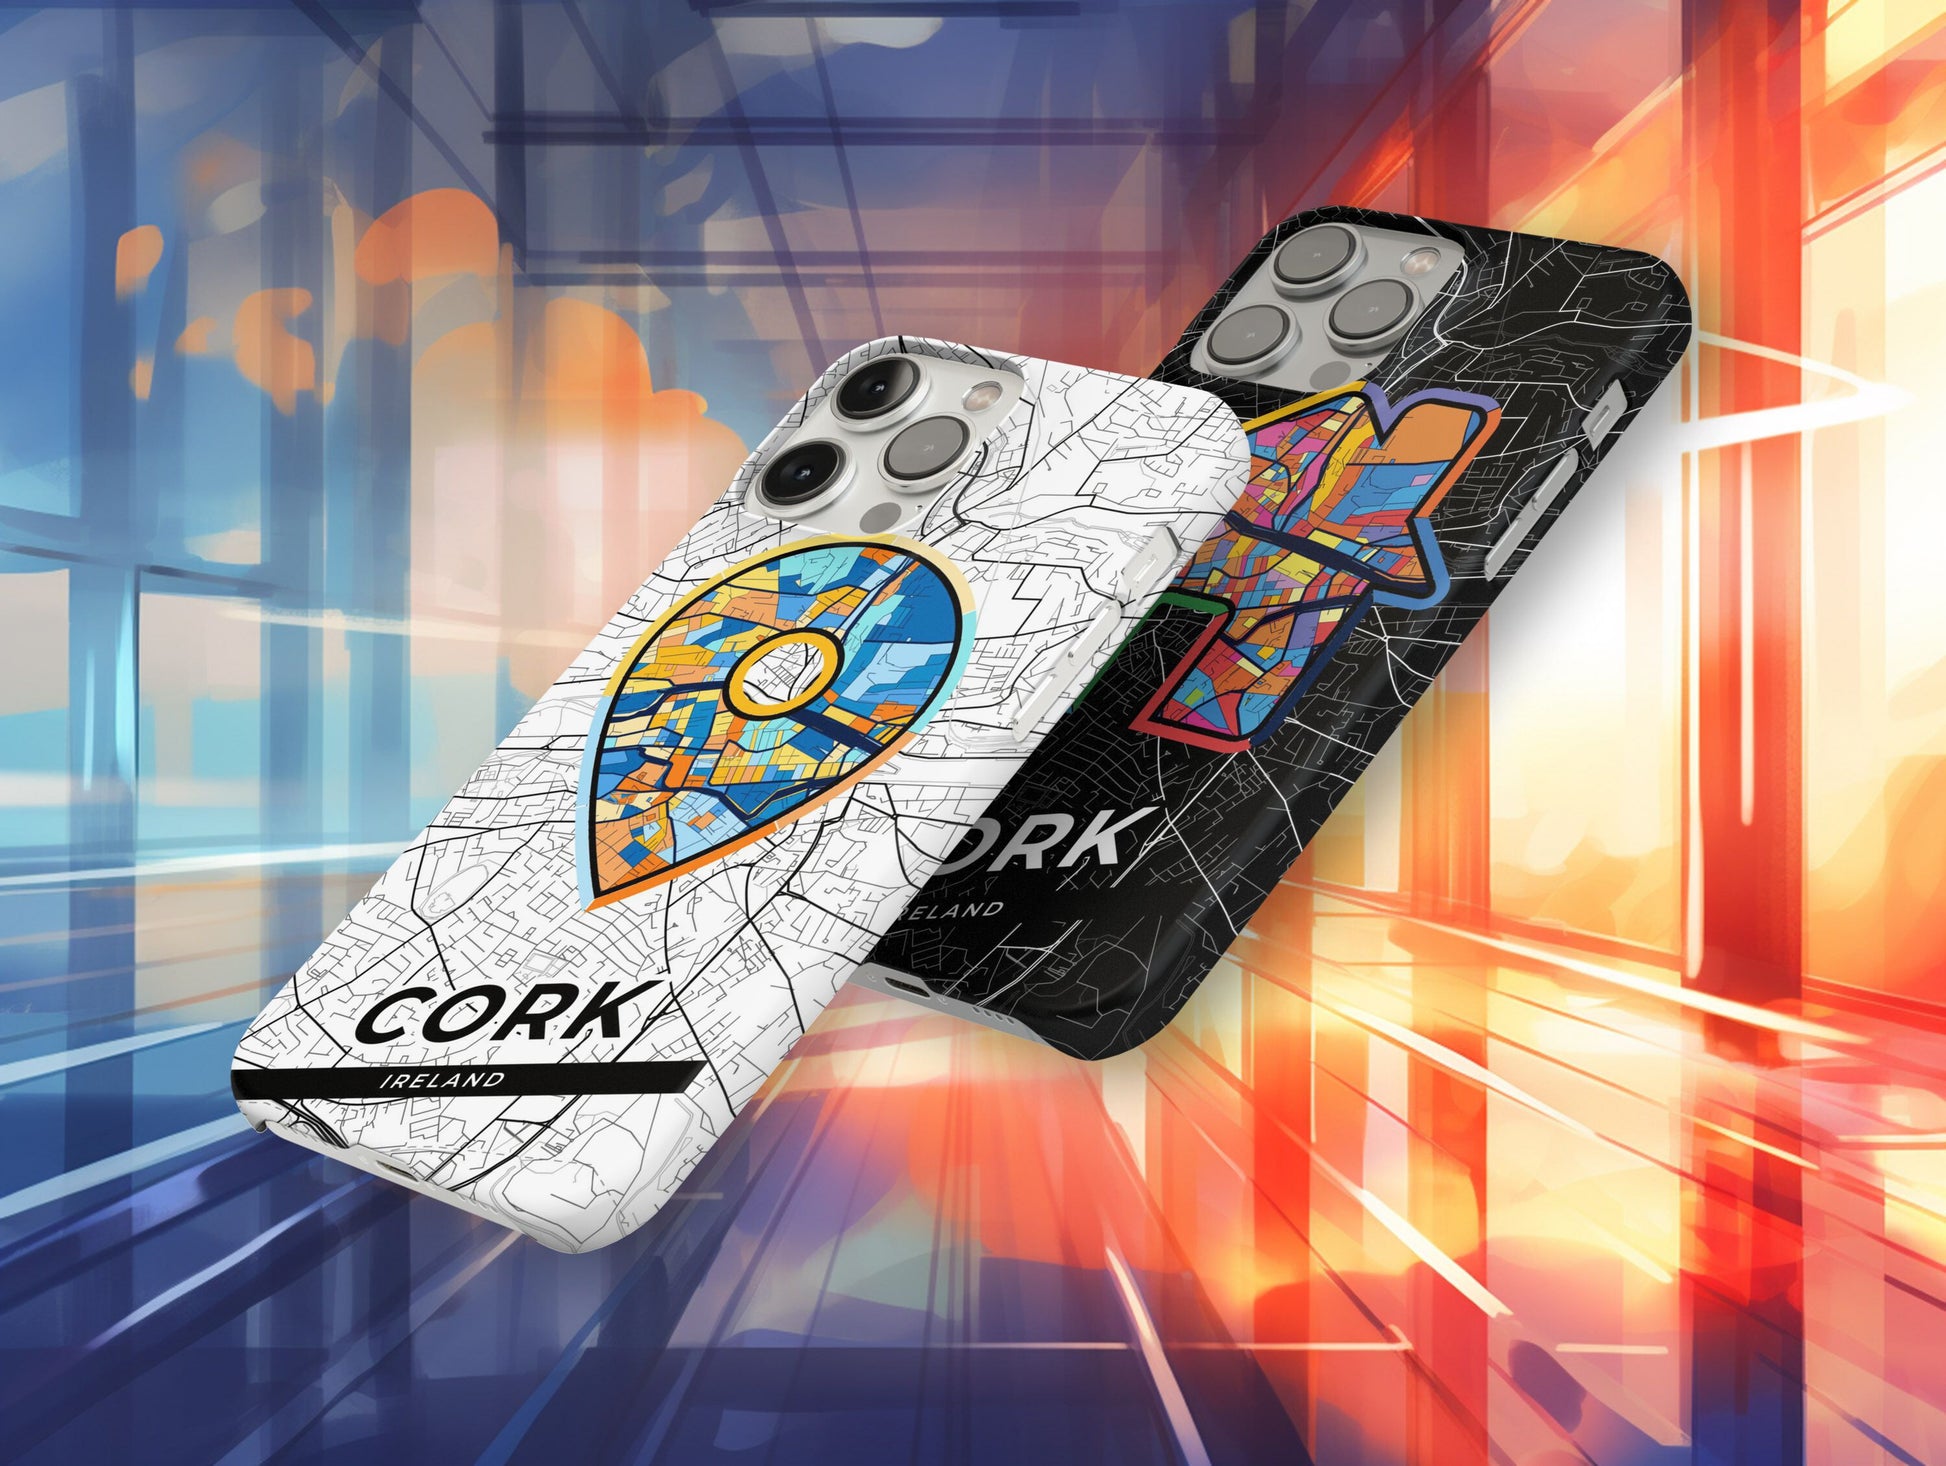 Cork Ireland slim phone case with colorful icon. Birthday, wedding or housewarming gift. Couple match cases.